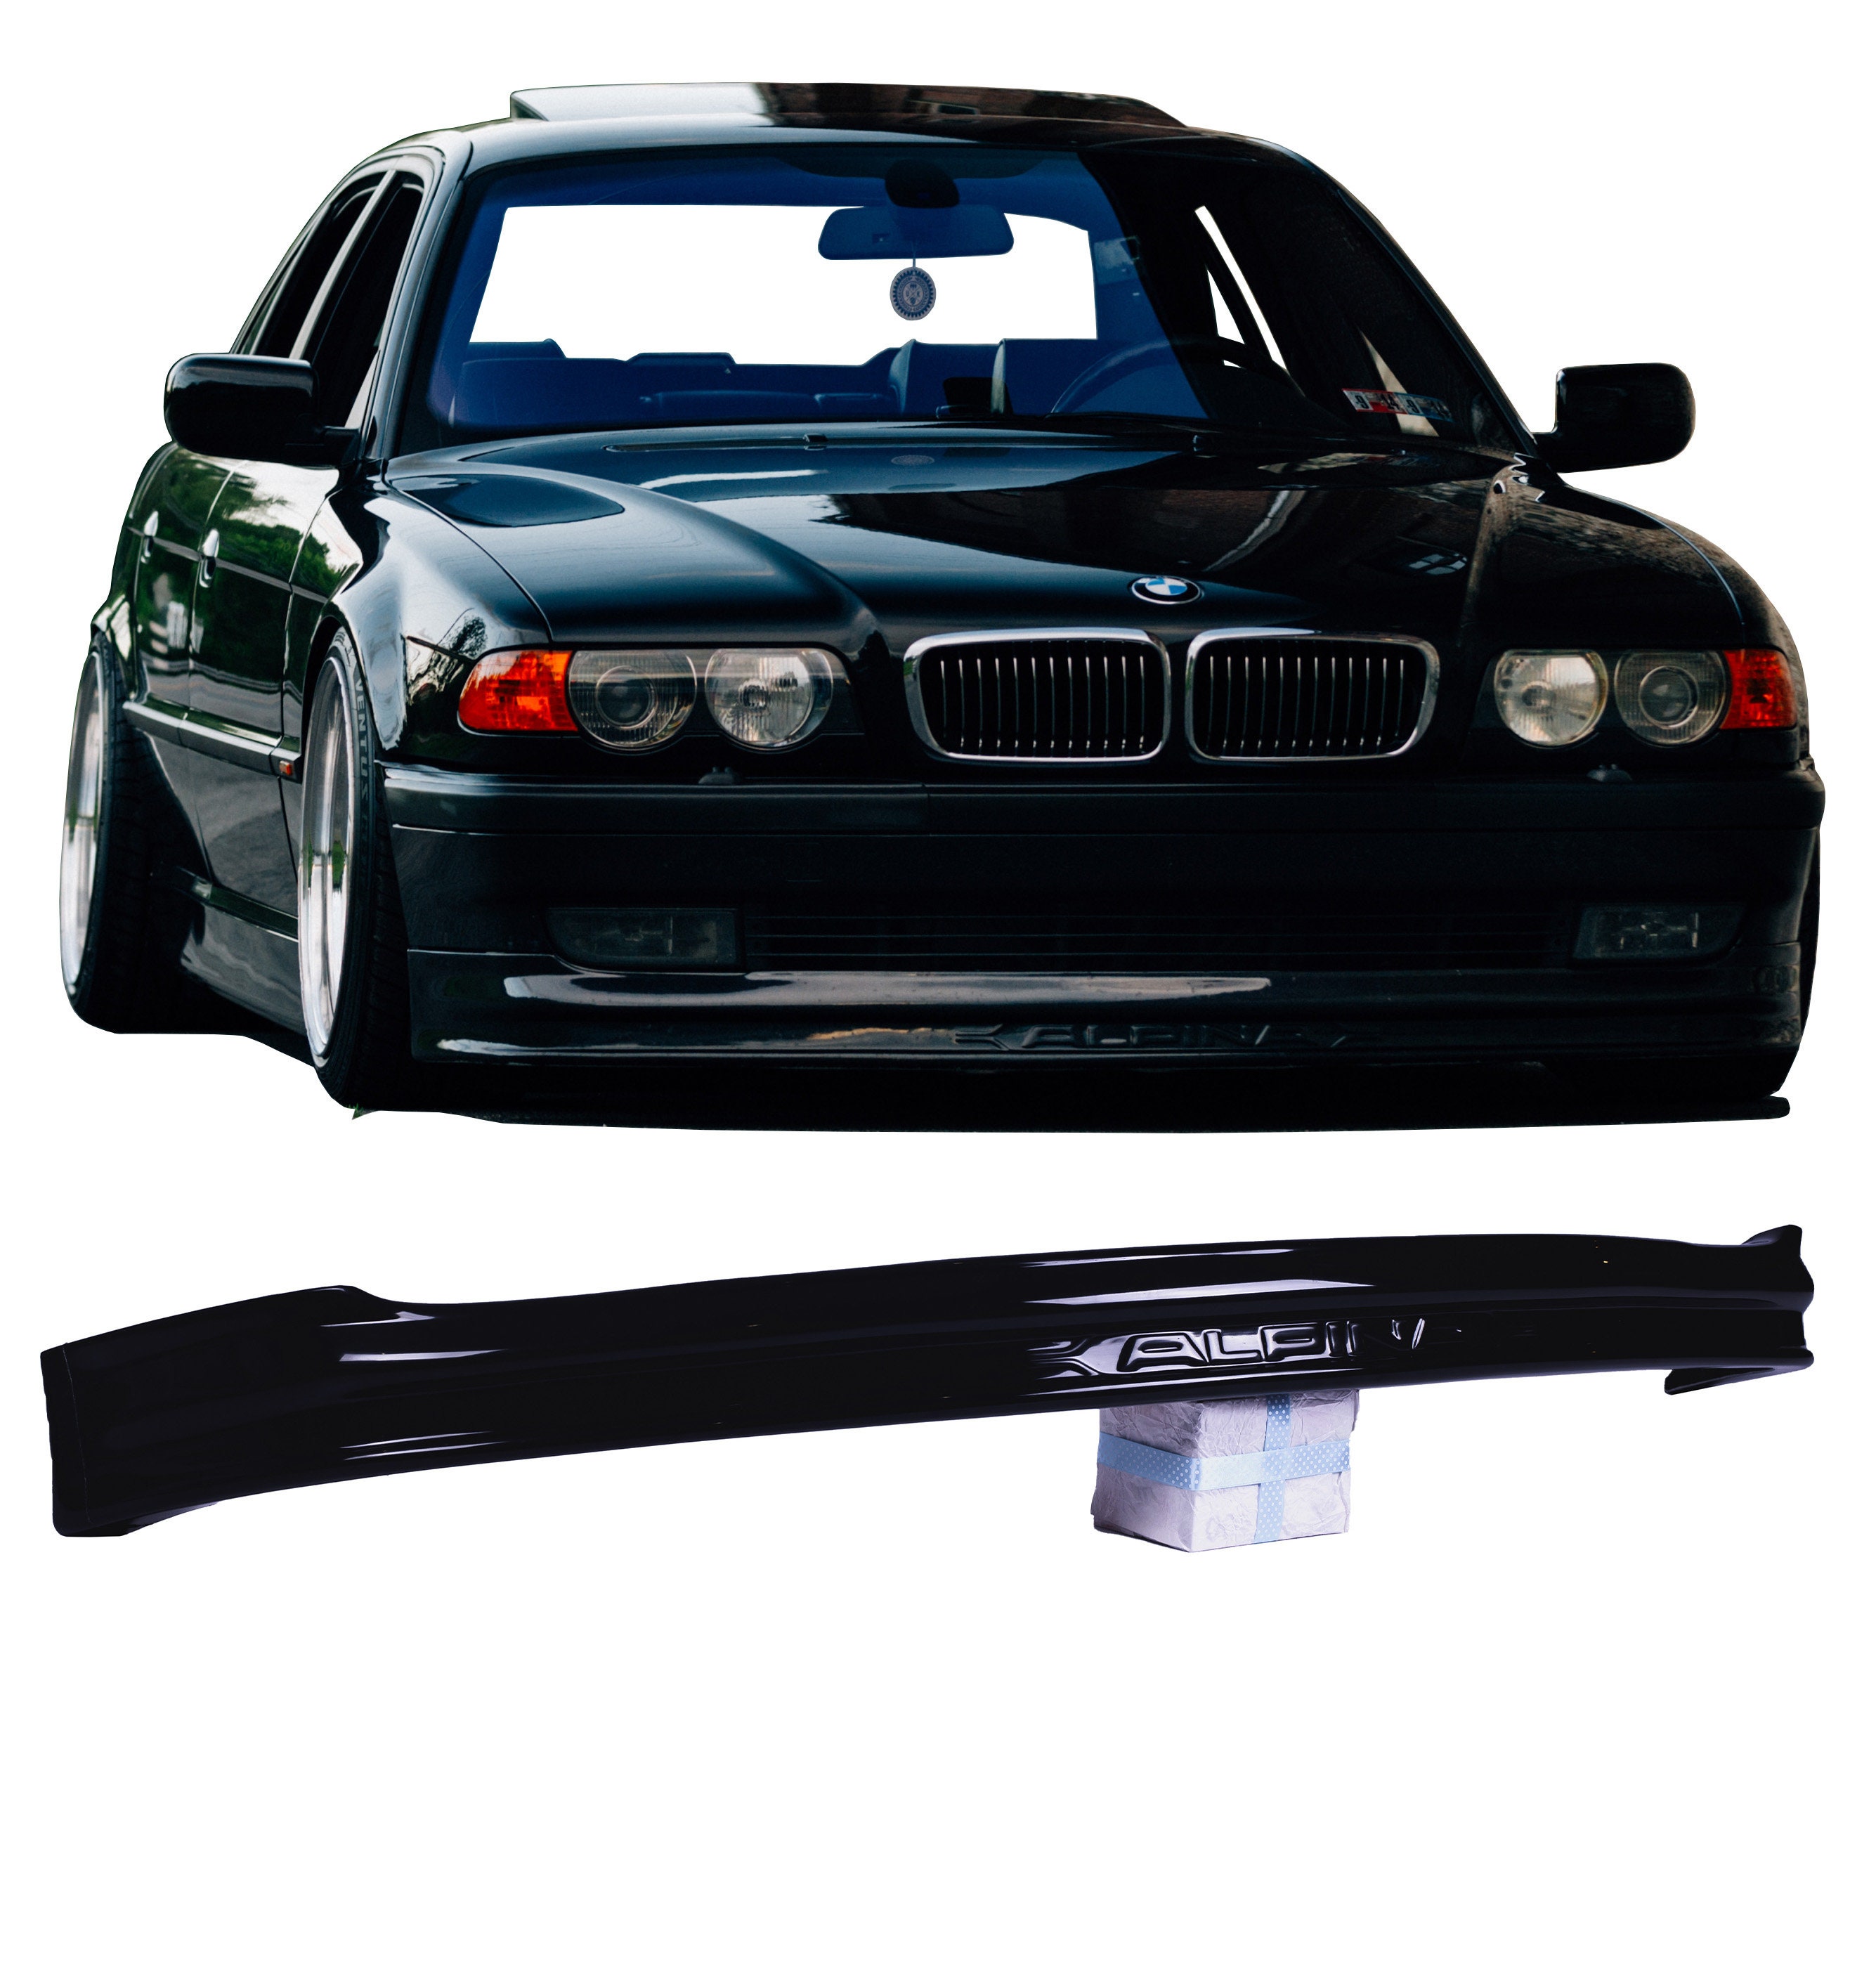 Bmw E39 2001-2003 Only and BMW E38 Alpina Style Tuning Front Bumper Apron  Full Splitter Lip Spoiler by Lasscar -  Finland